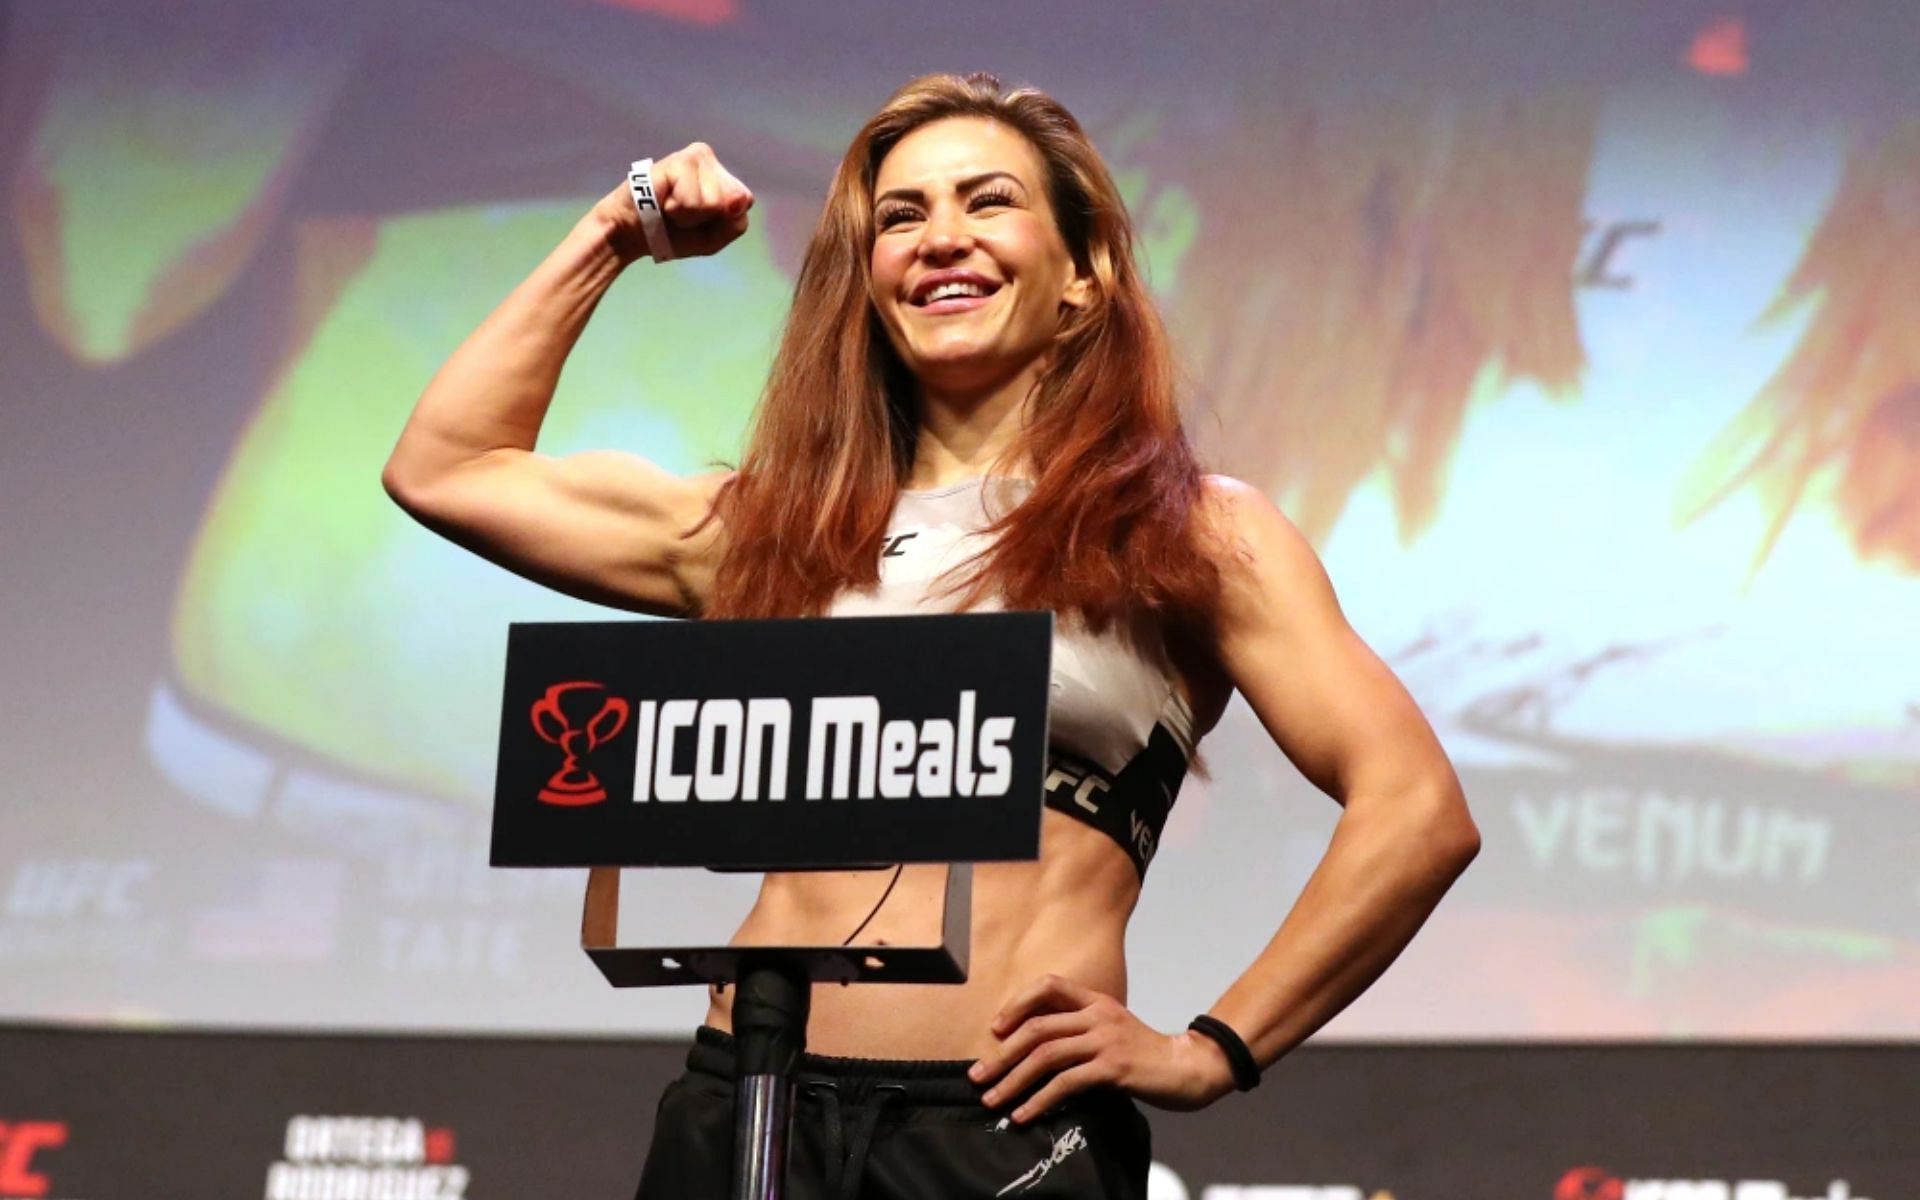 Outside of the headline bout, Miesha Tate is the fighter to watch this weekend